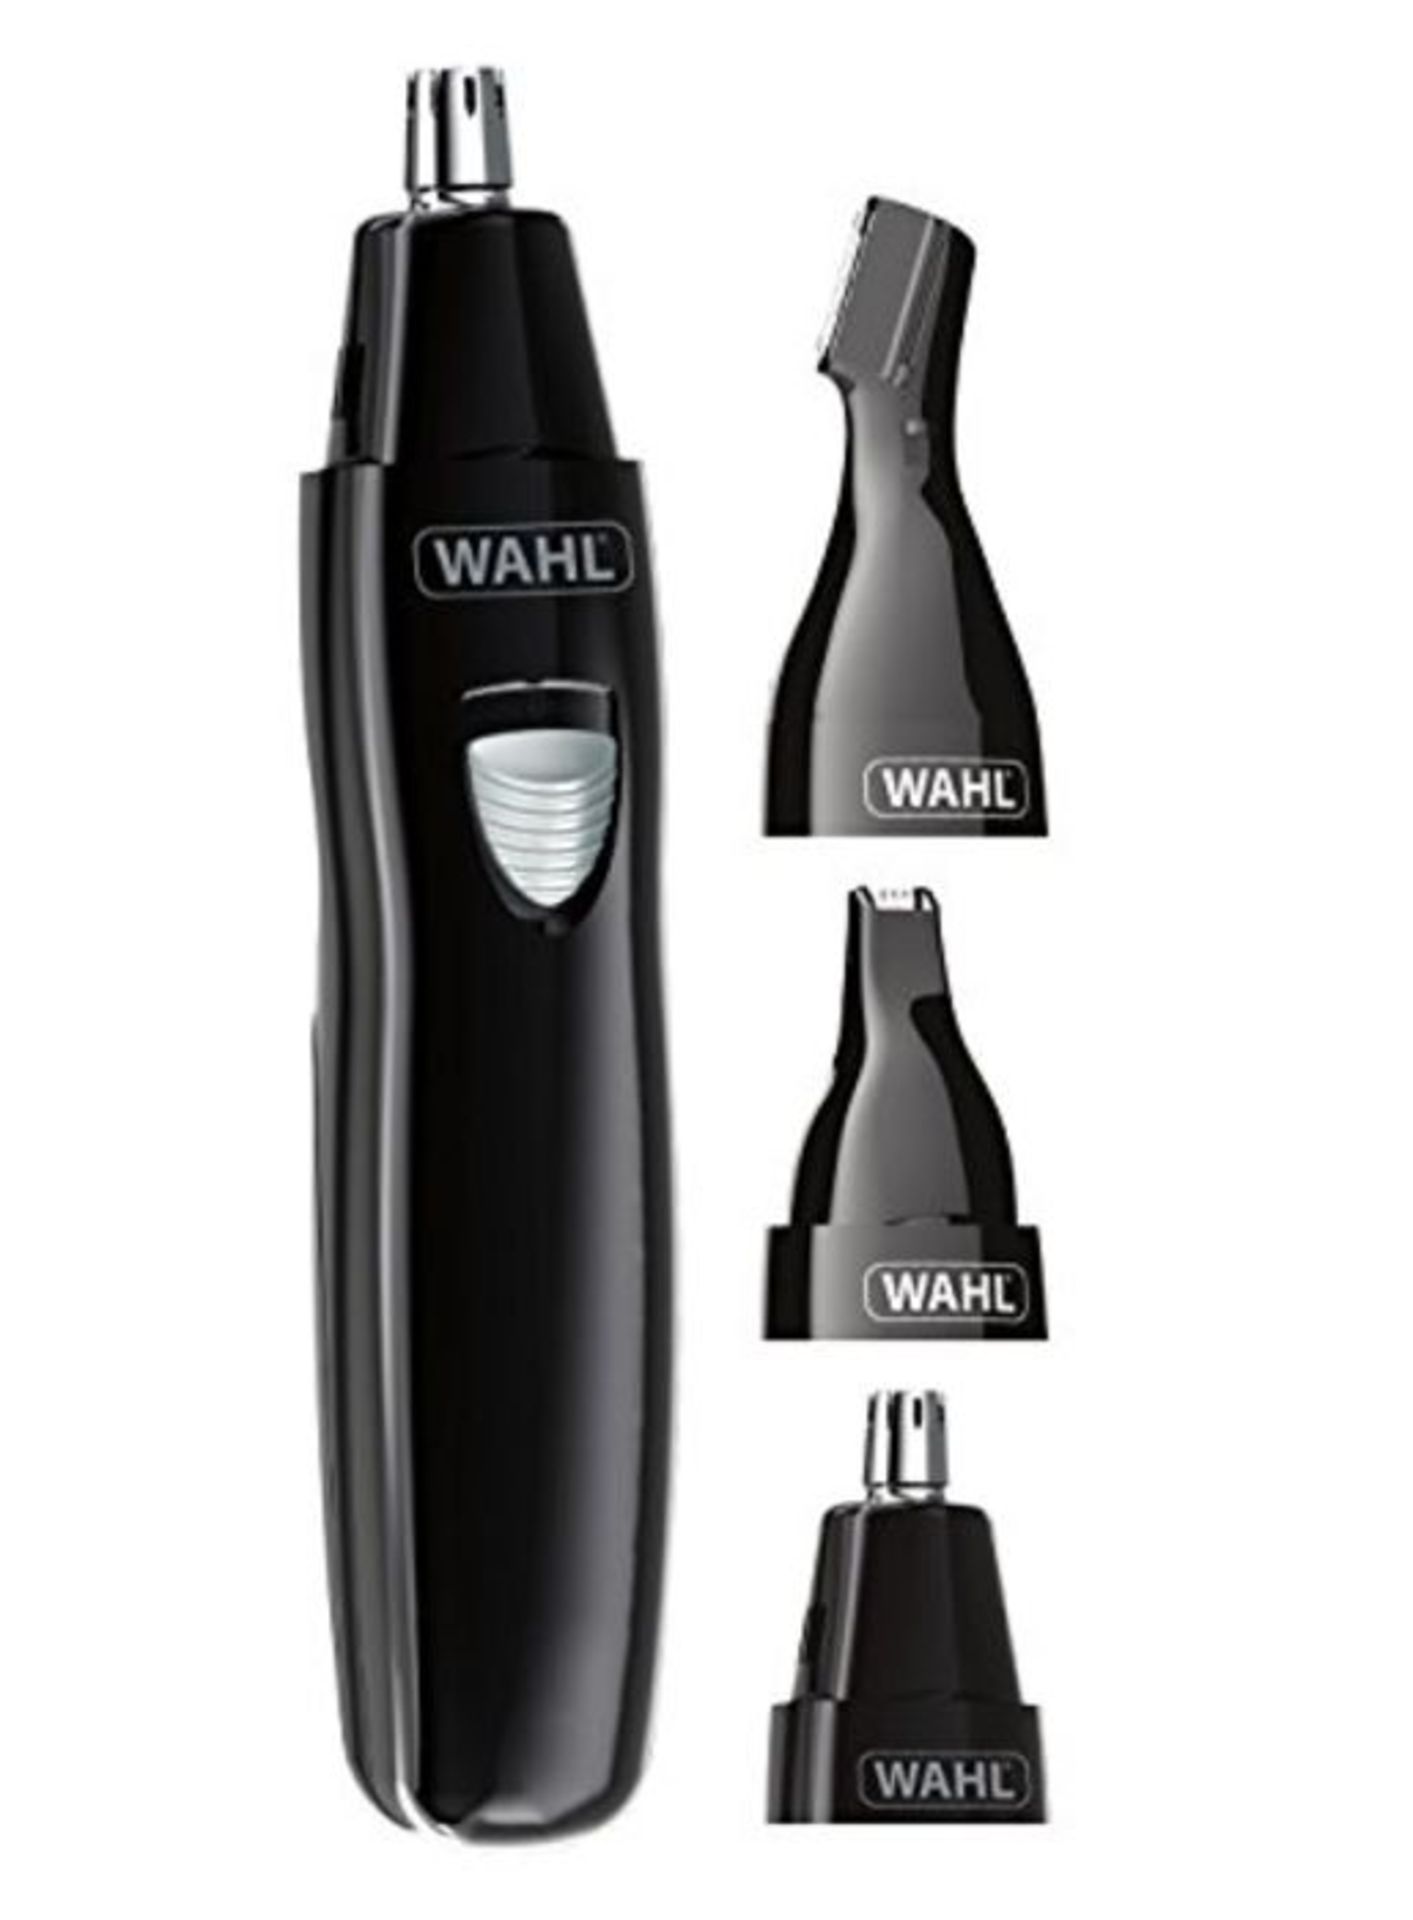 Wahl Nose Hair Trimmer for Men and Women 3-in-1 Ear and Eyebrow Trimmer, Rechargeable,